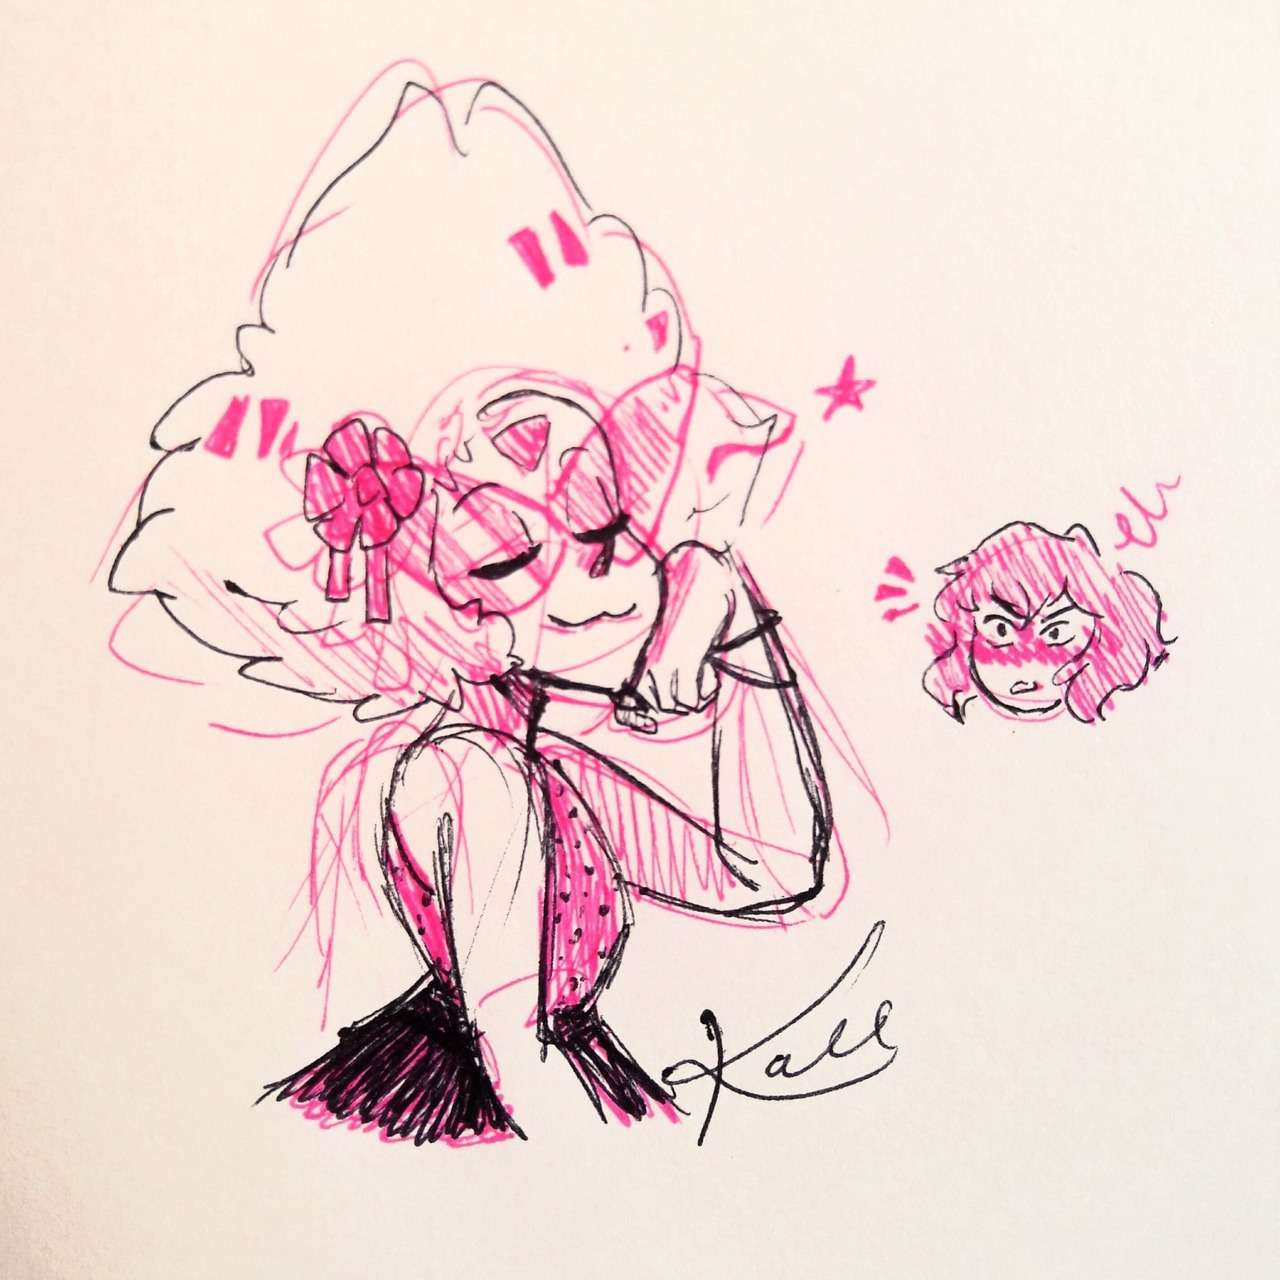 lesbabe6 said: I love your style. It's absolutely lovely. The fluffiest peri™!! Answer: Thank you ♡♡! Peridorito is so adorable and cute uwu